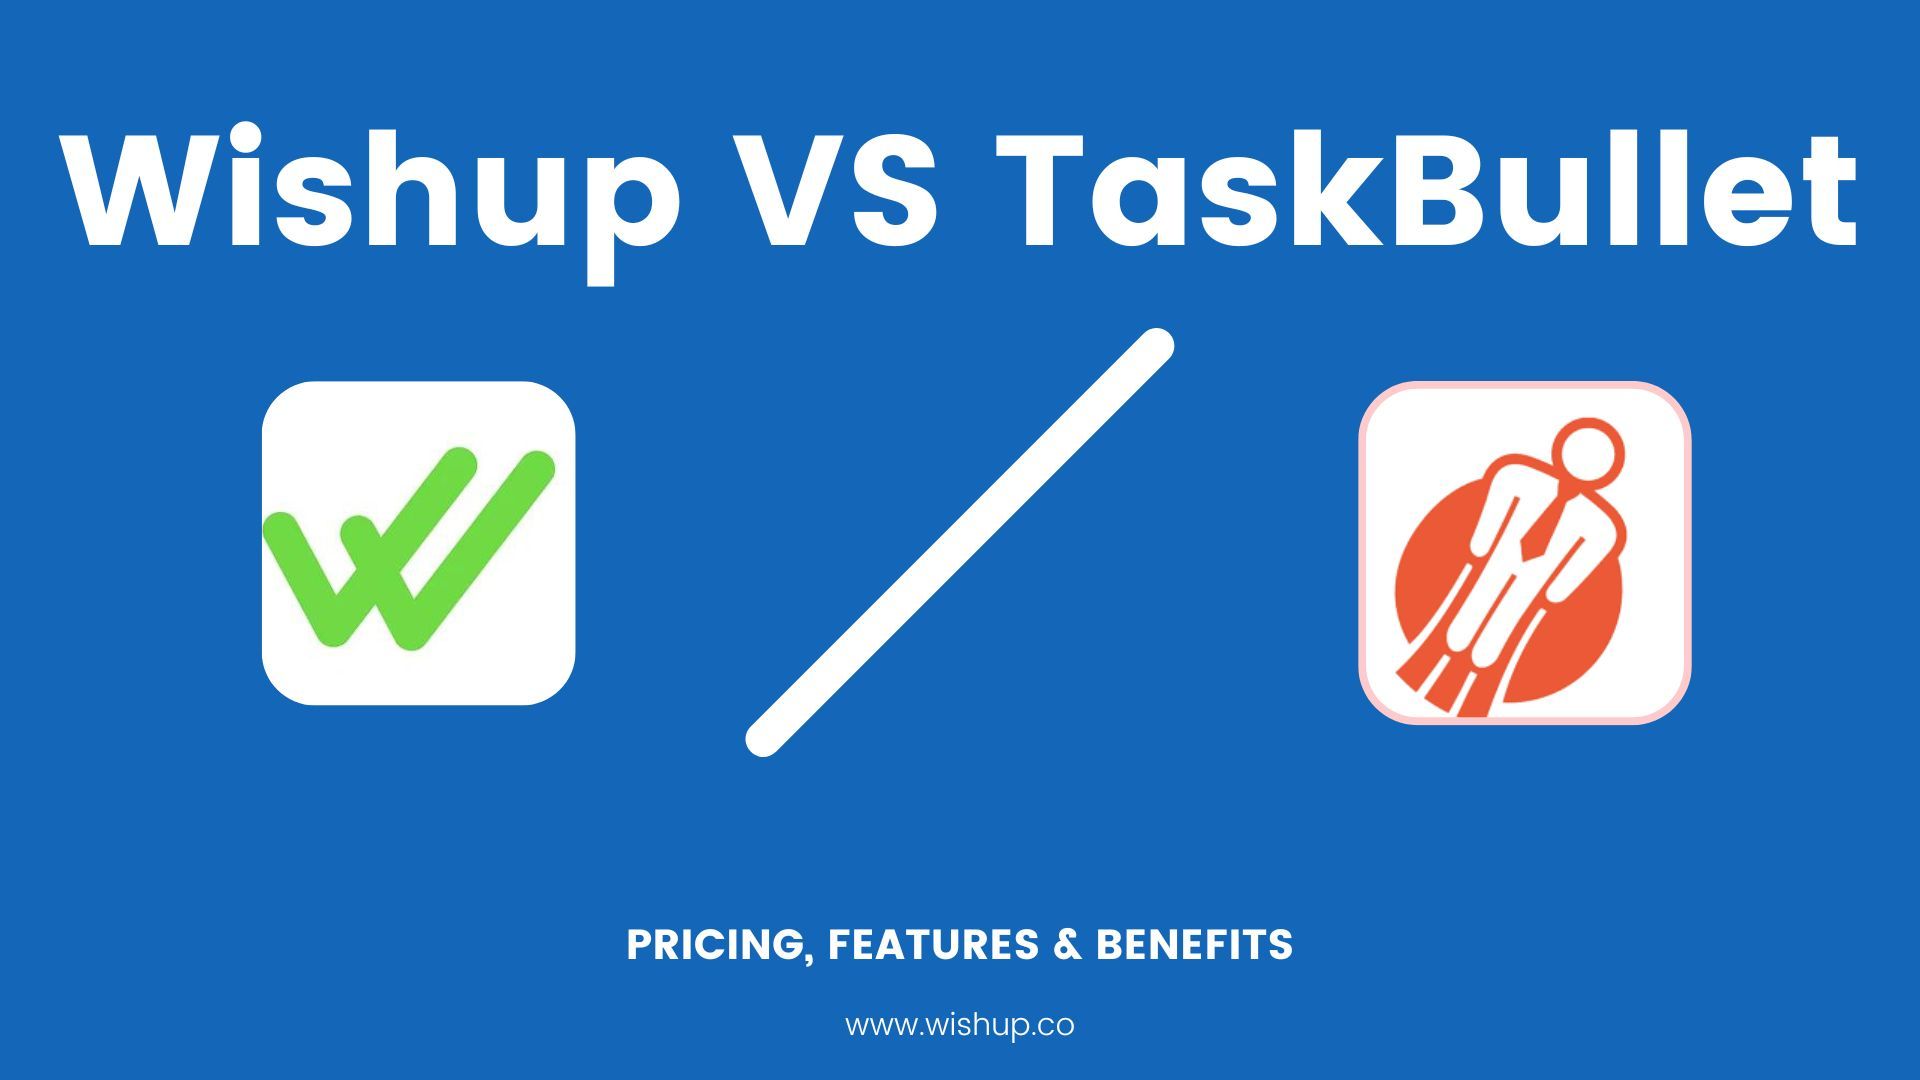 Why Wishup Virtual Assistants are better than TaskBullet